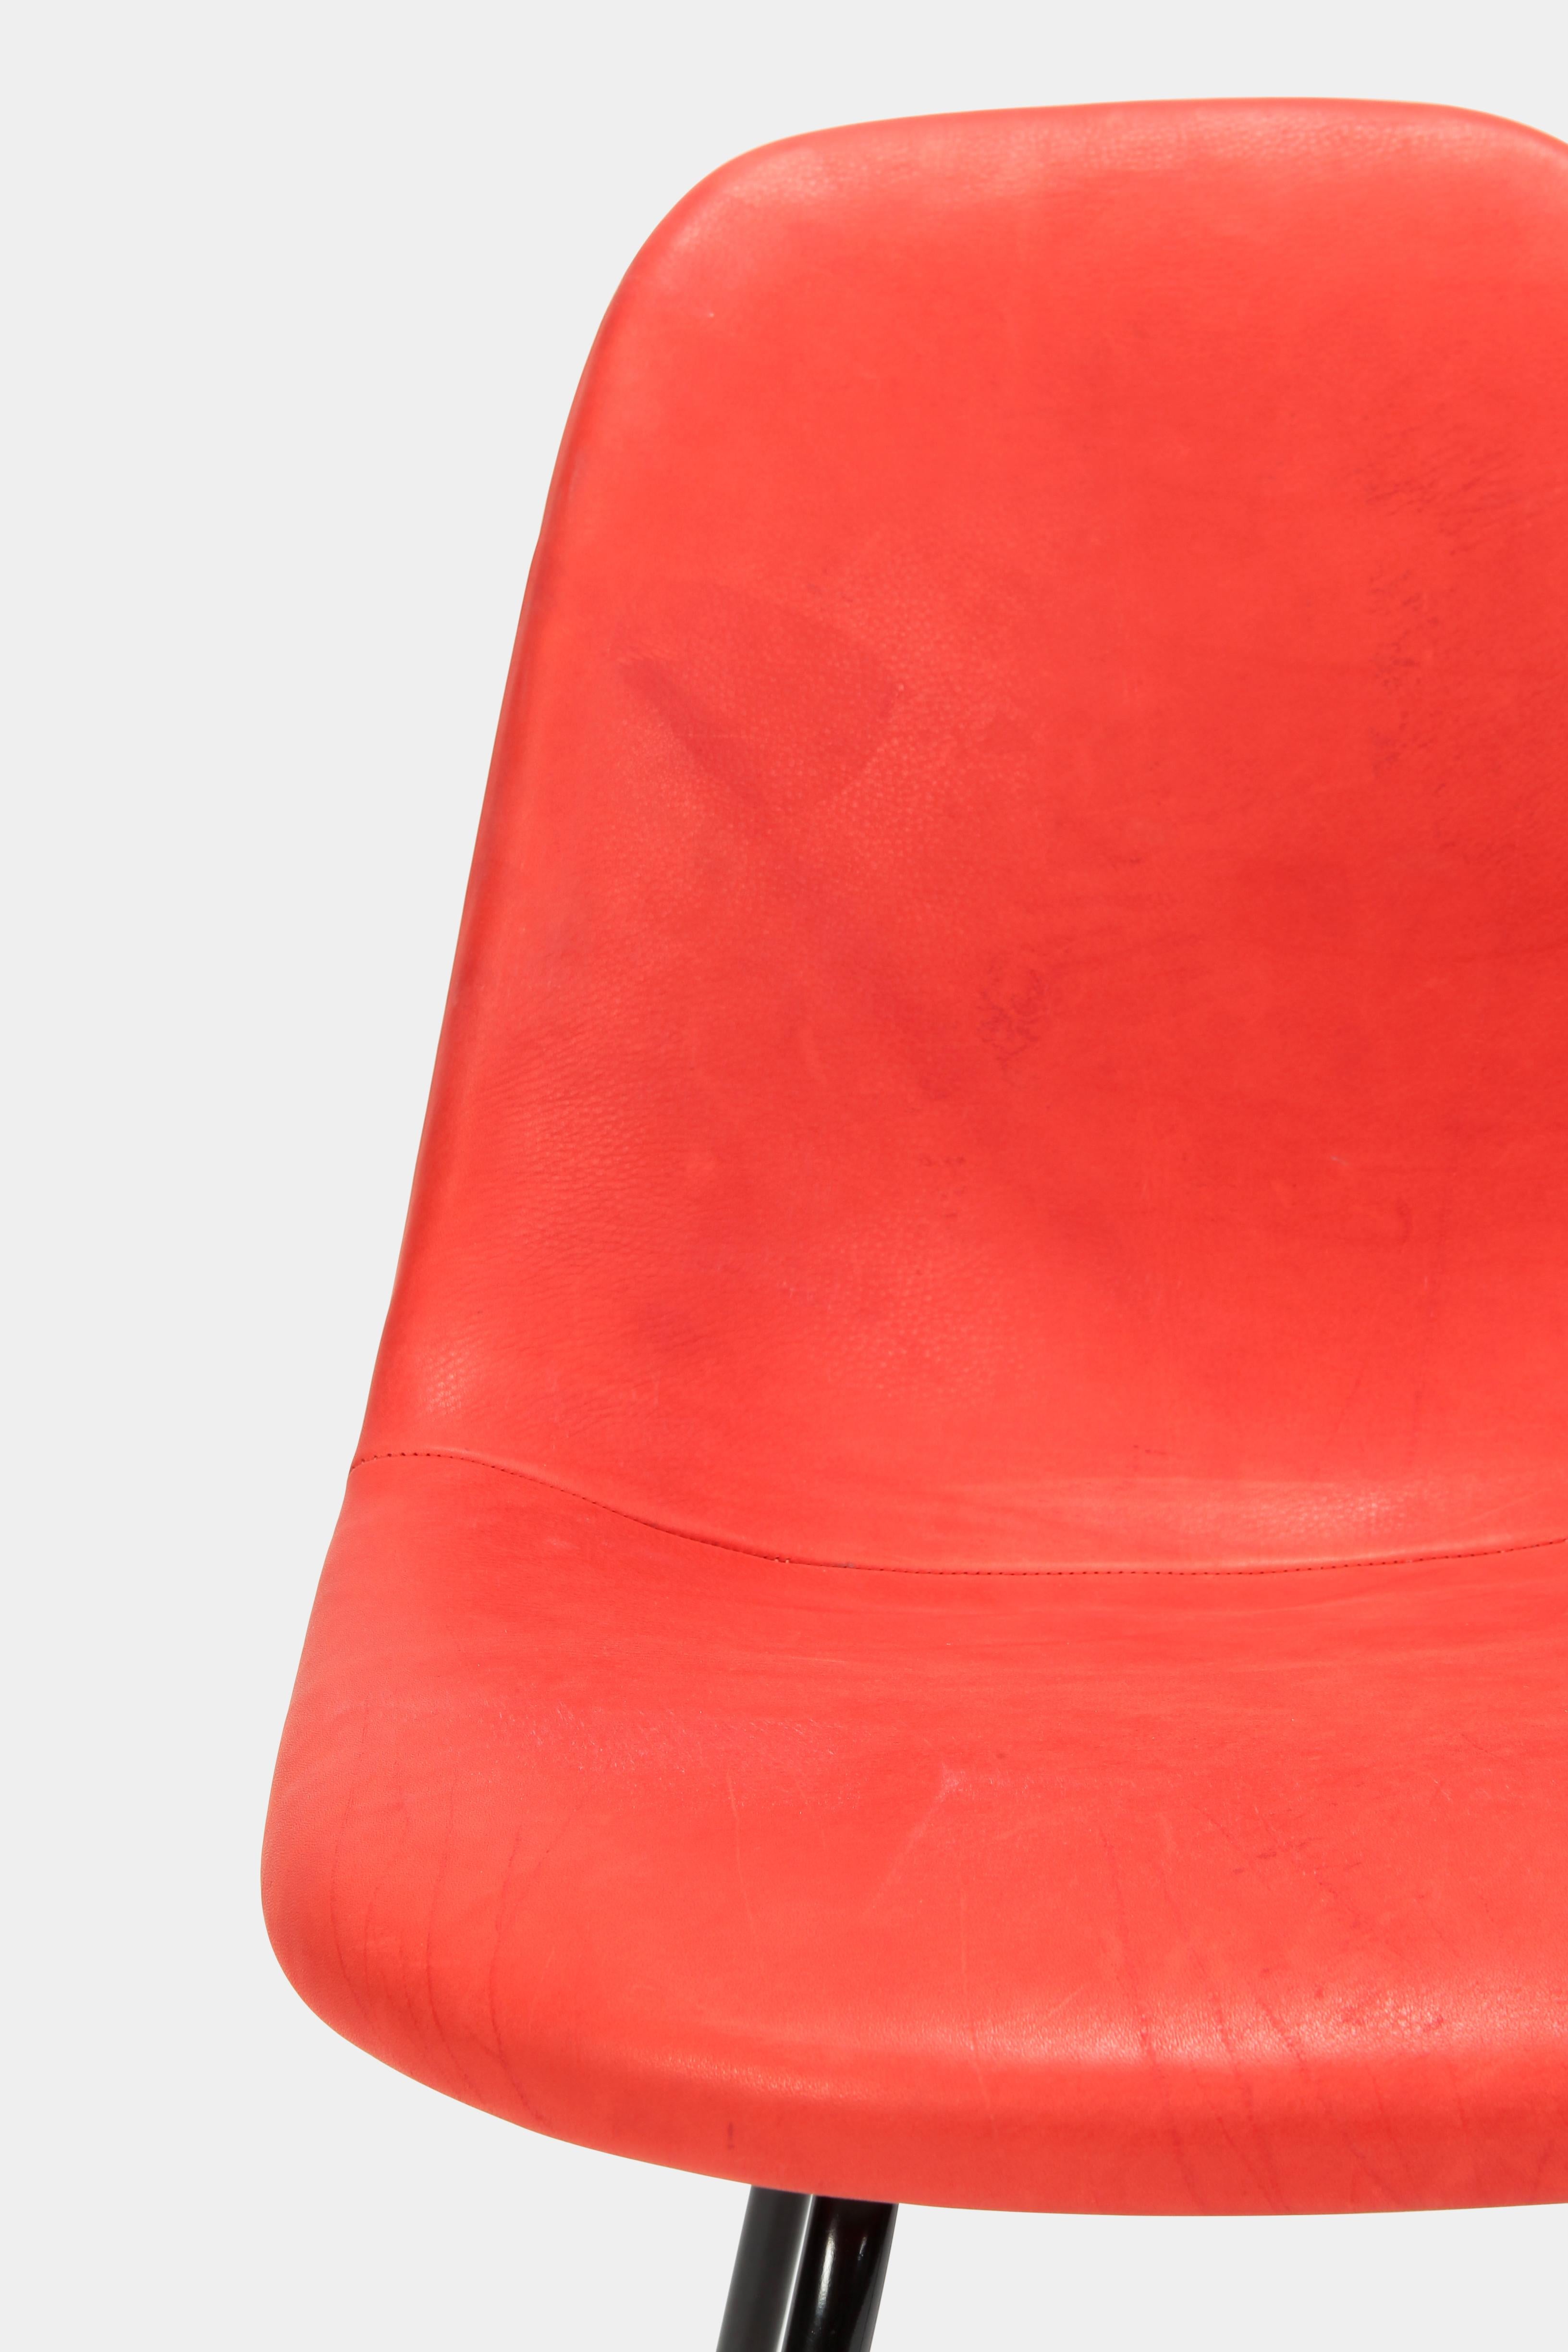 Eames Side Chair Red Leather, 1960s For Sale 2